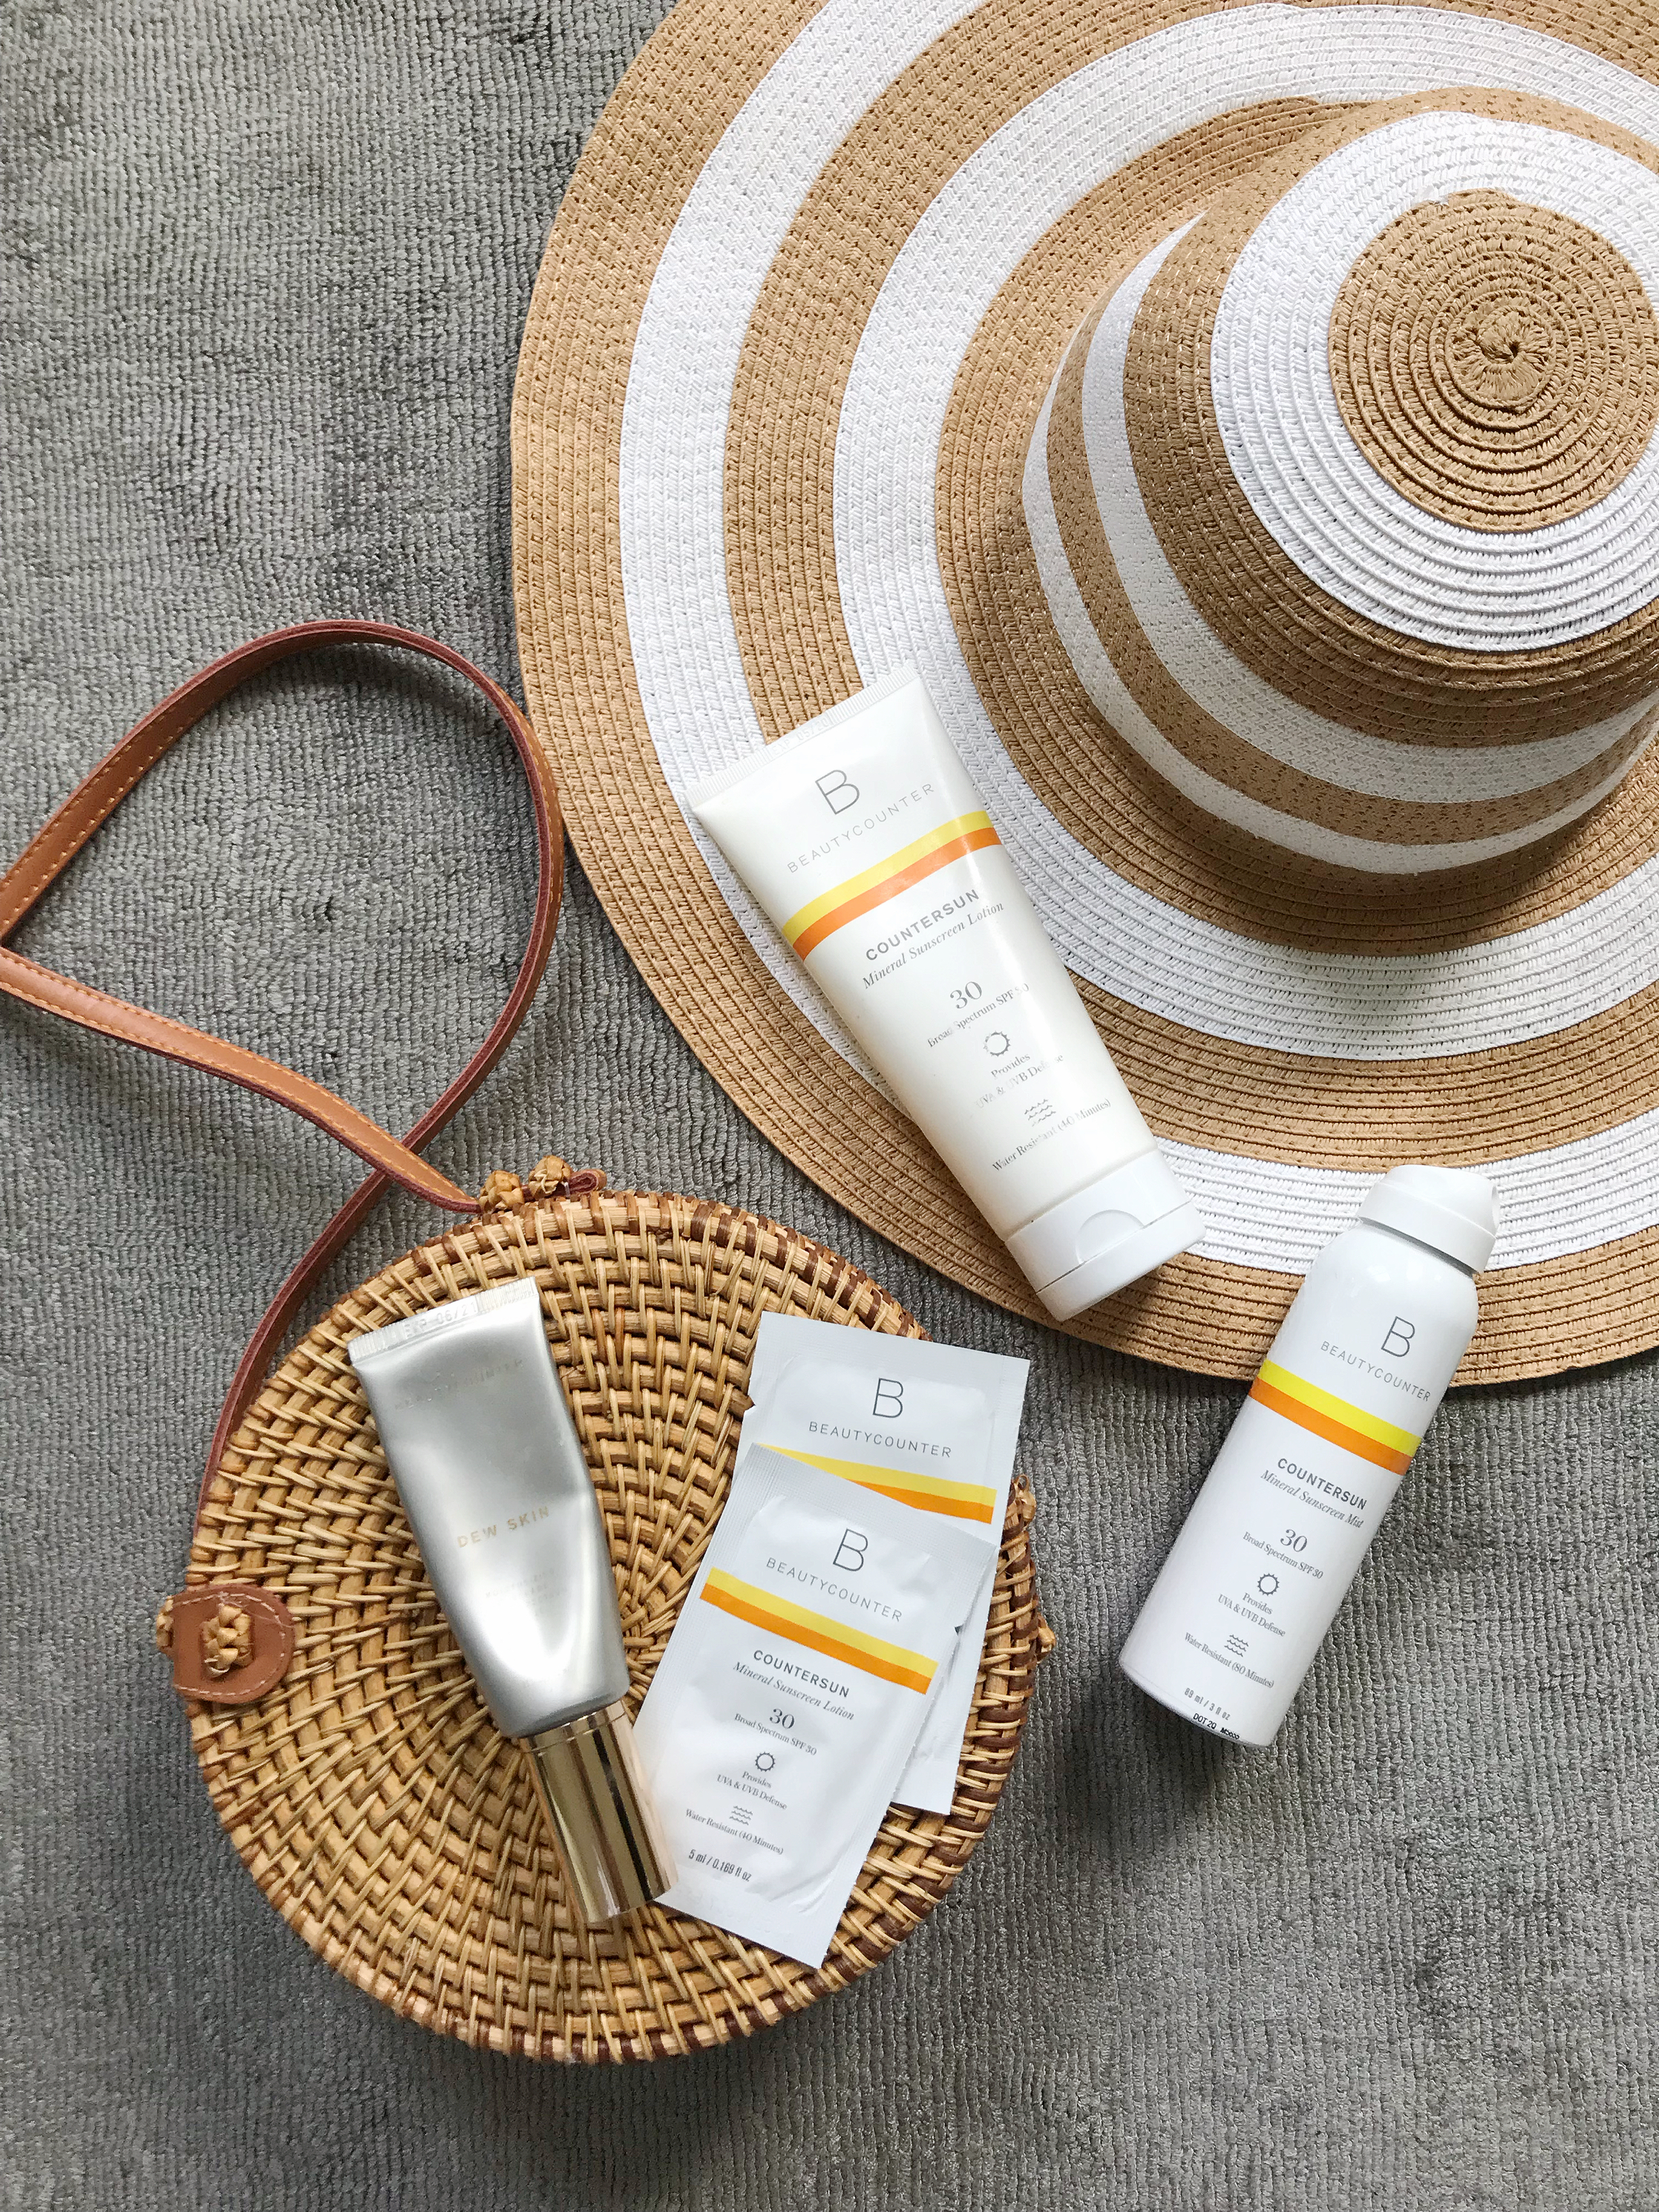 staying safe in the sun. safe sunscreen. best sunscreen for the family. reef-safe sunscreen. SPF you need